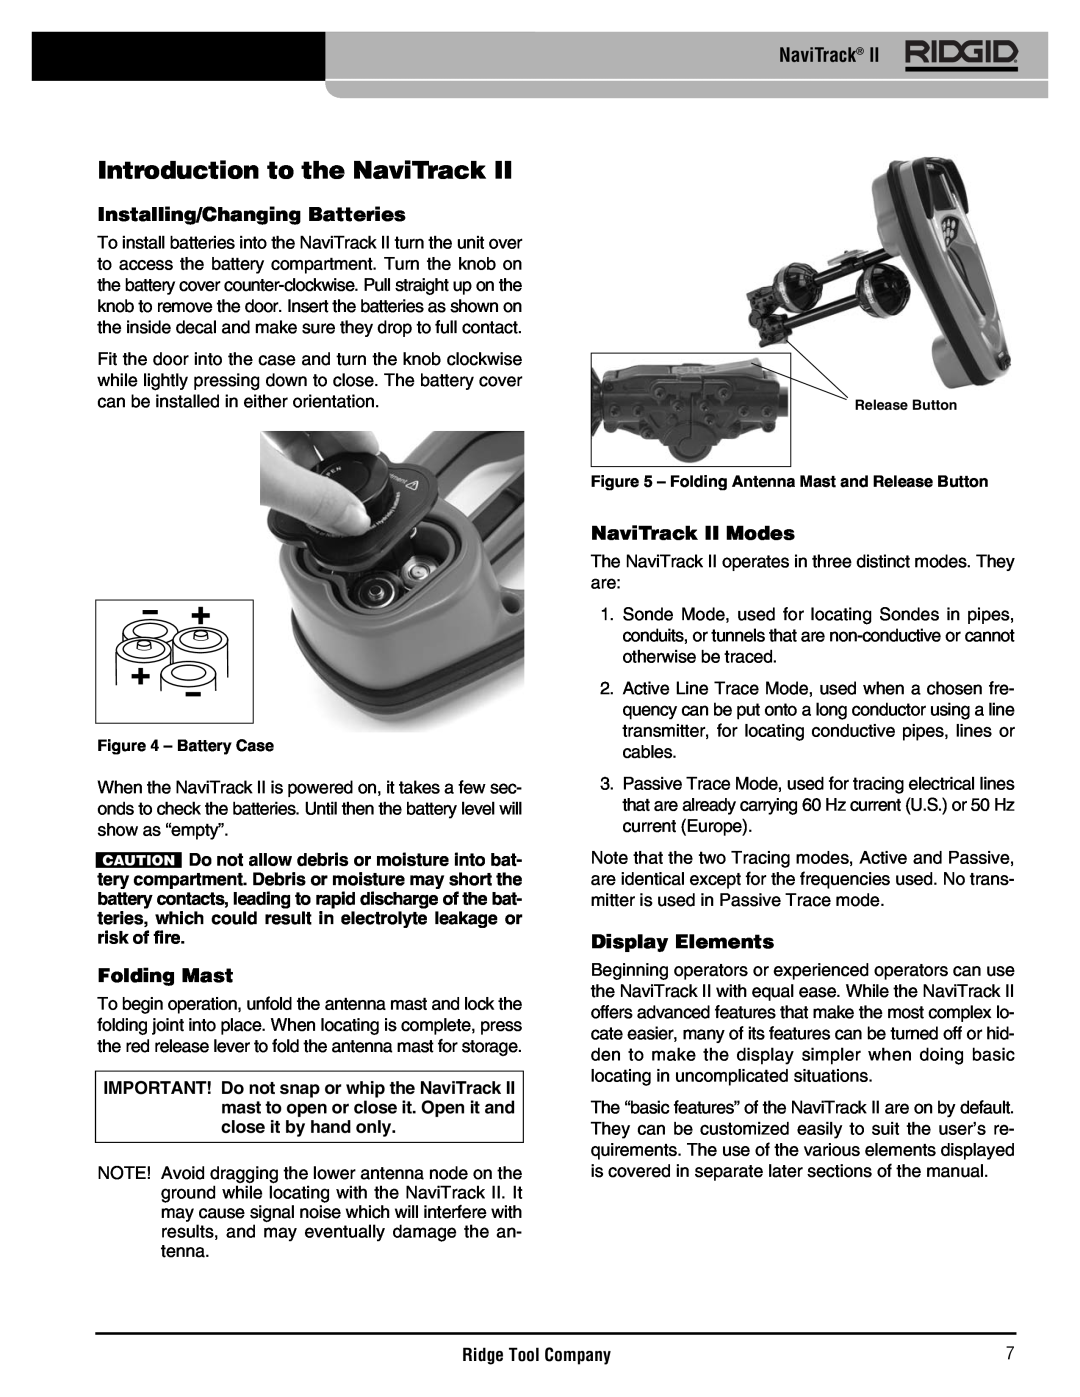 RIDGID Metal Detector manual Introduction to the NaviTrack, Installing/Changing Batteries, Folding Mast, NaviTrack II Modes 